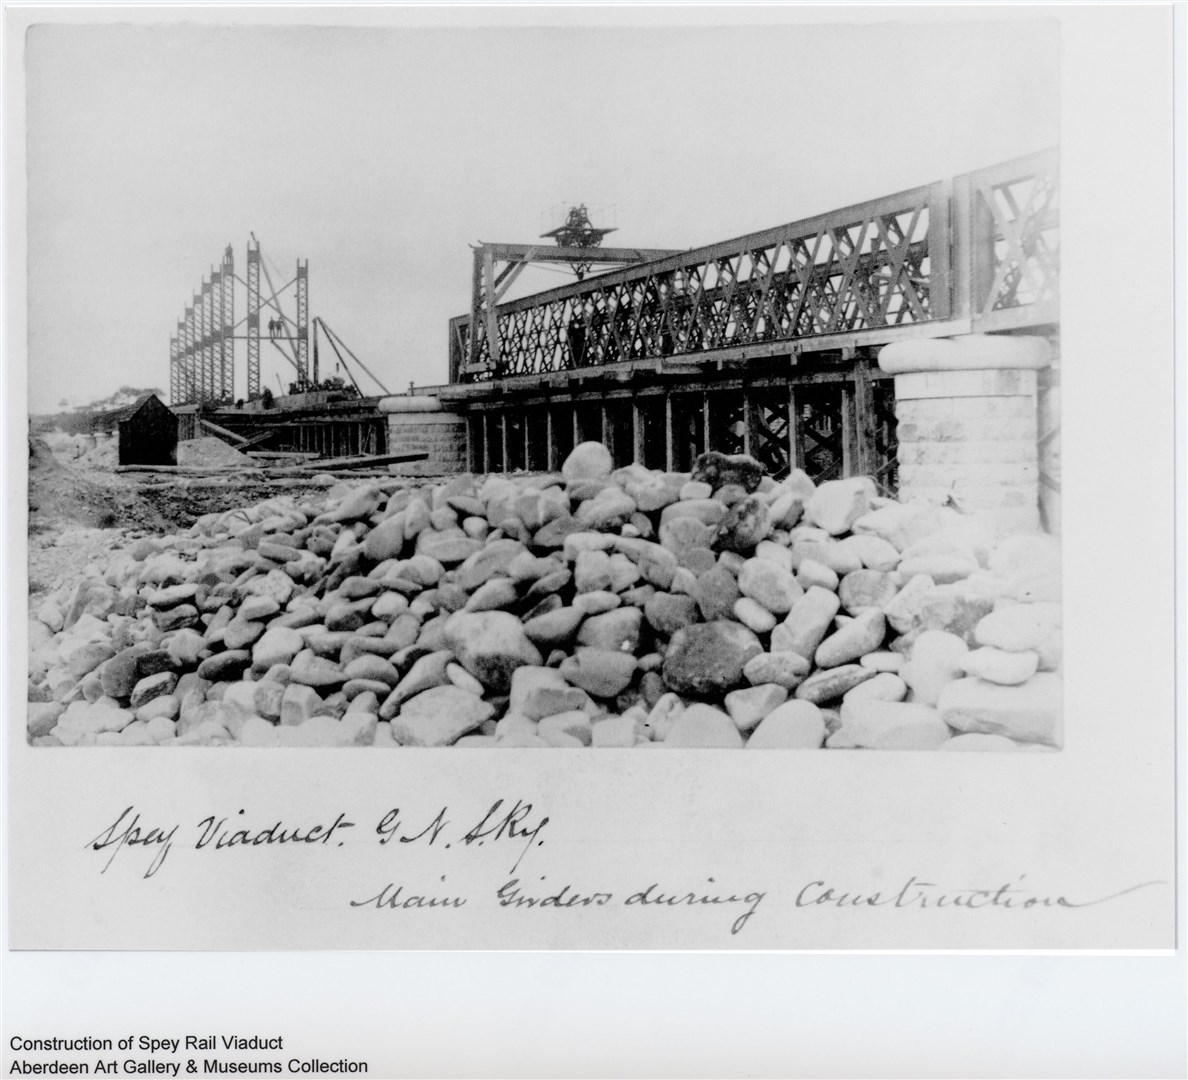 During construction